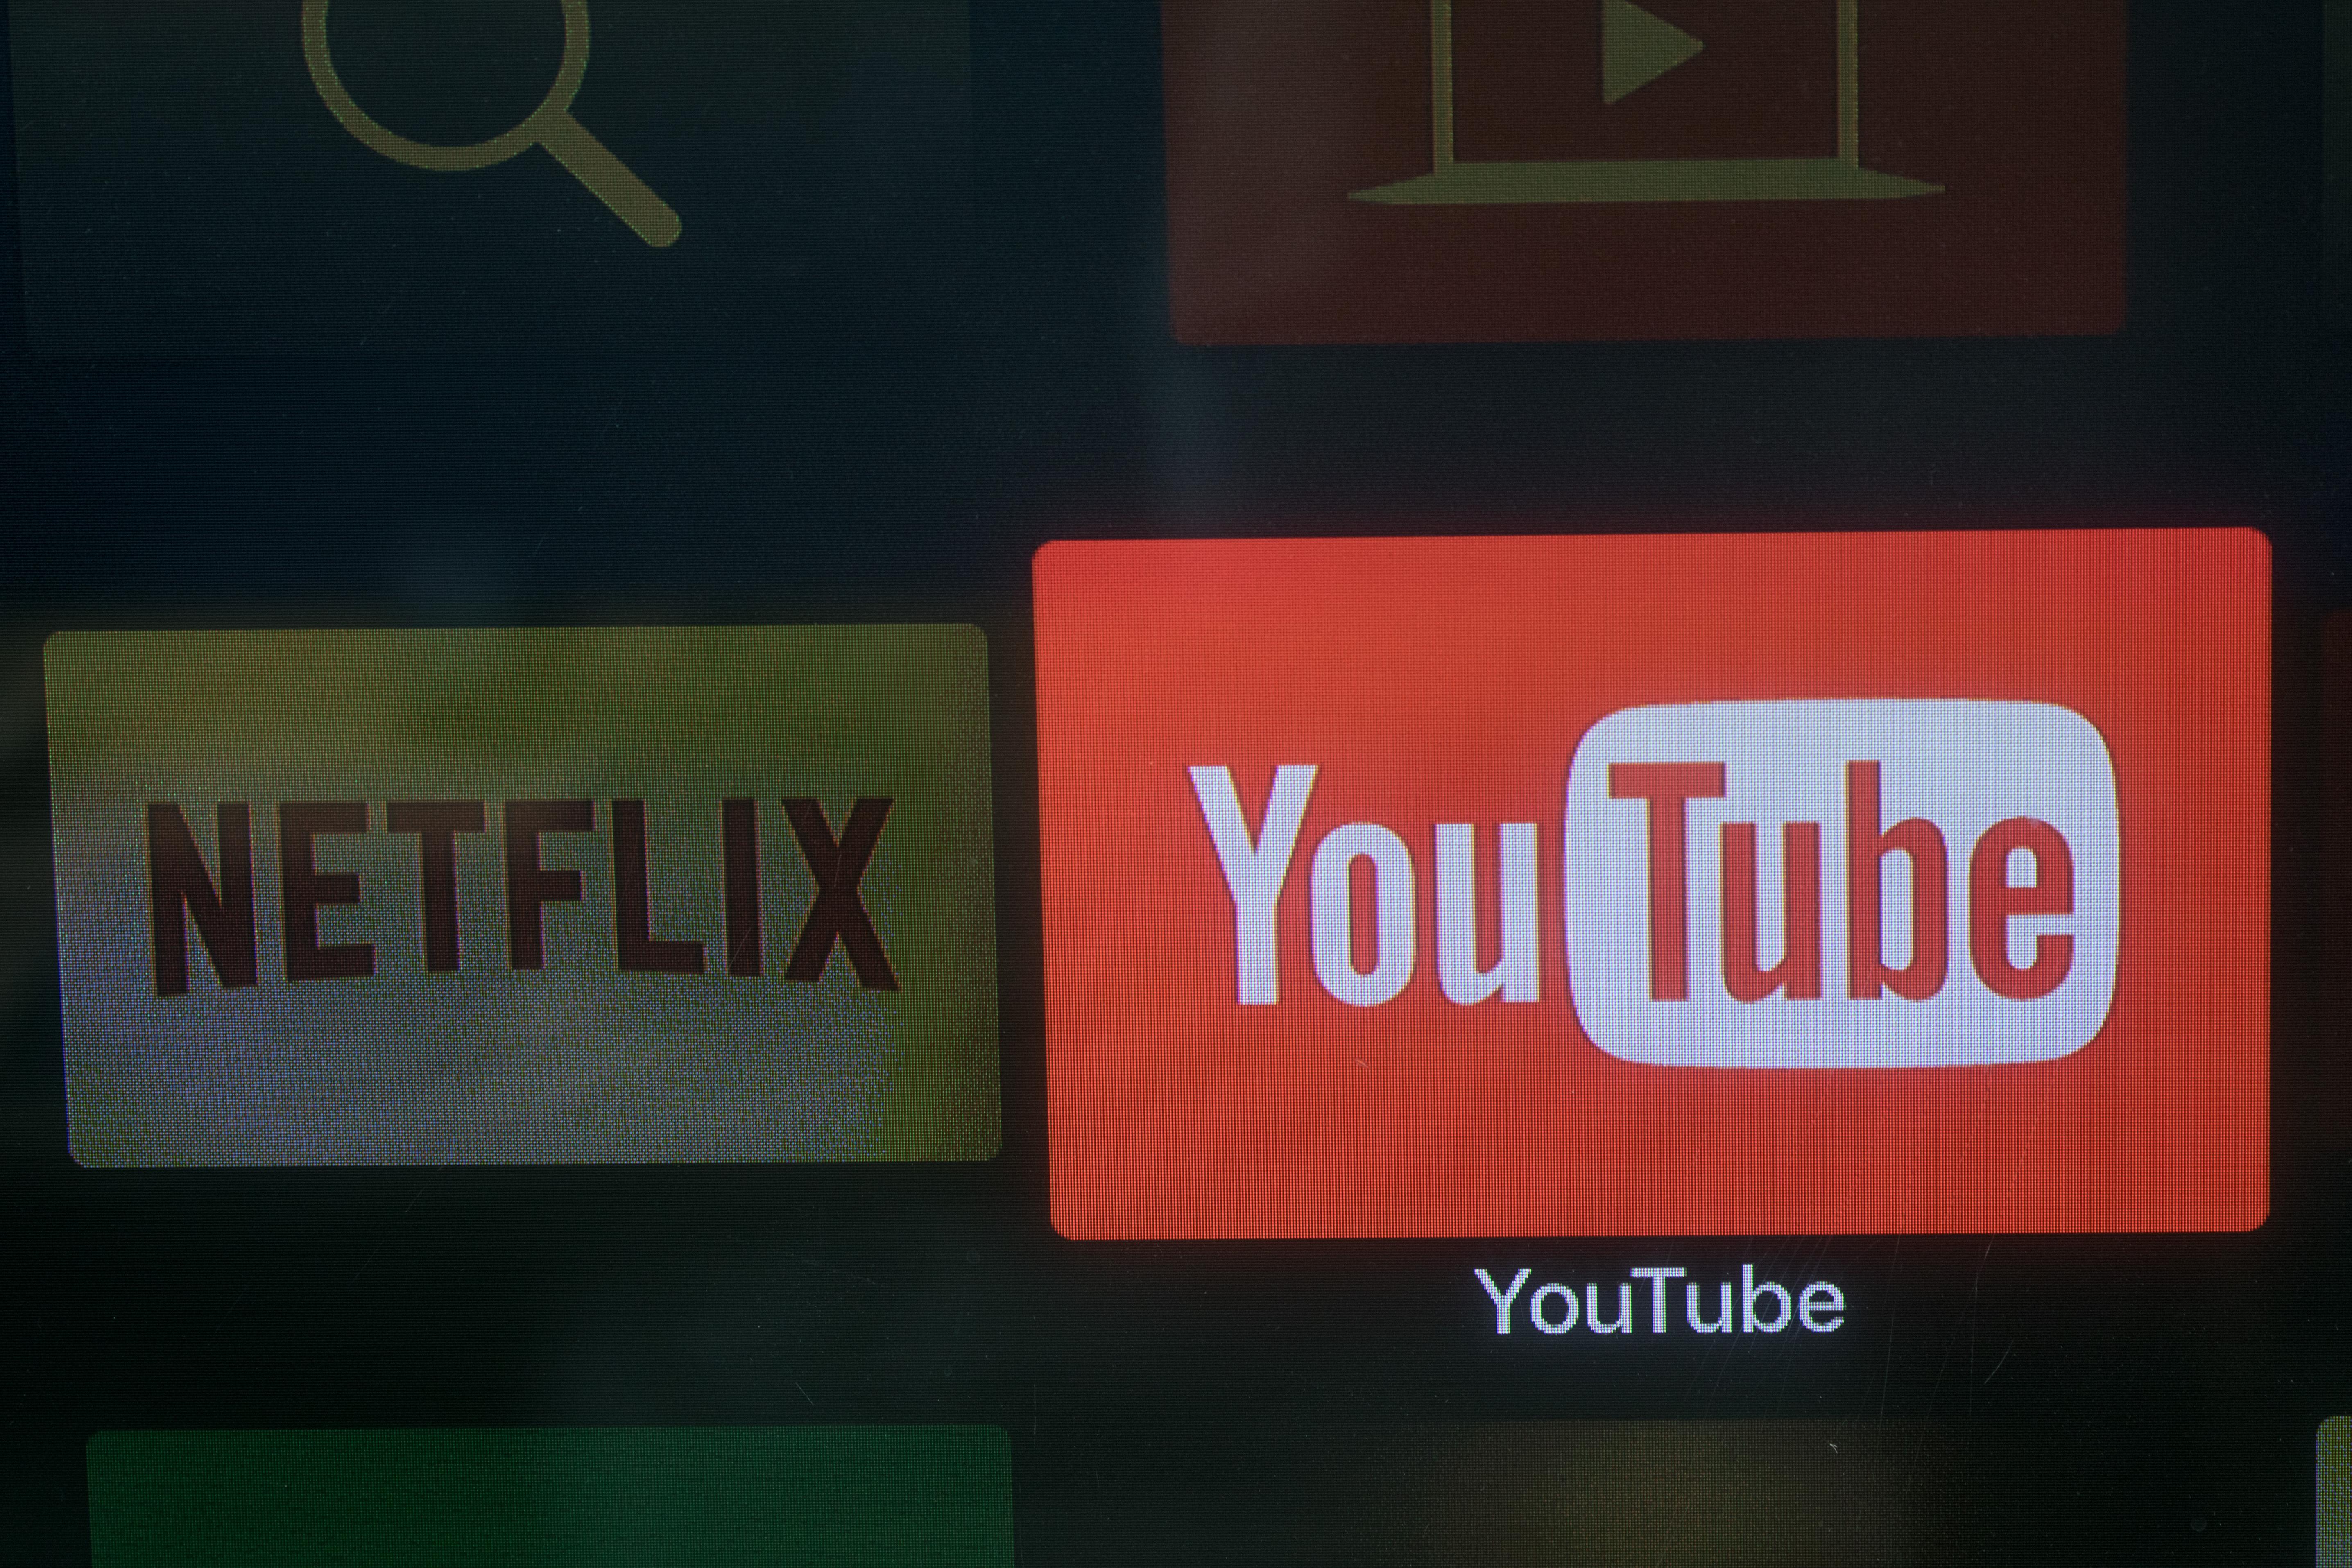 The YouTube and Netflix app logos are seen on a television screen.